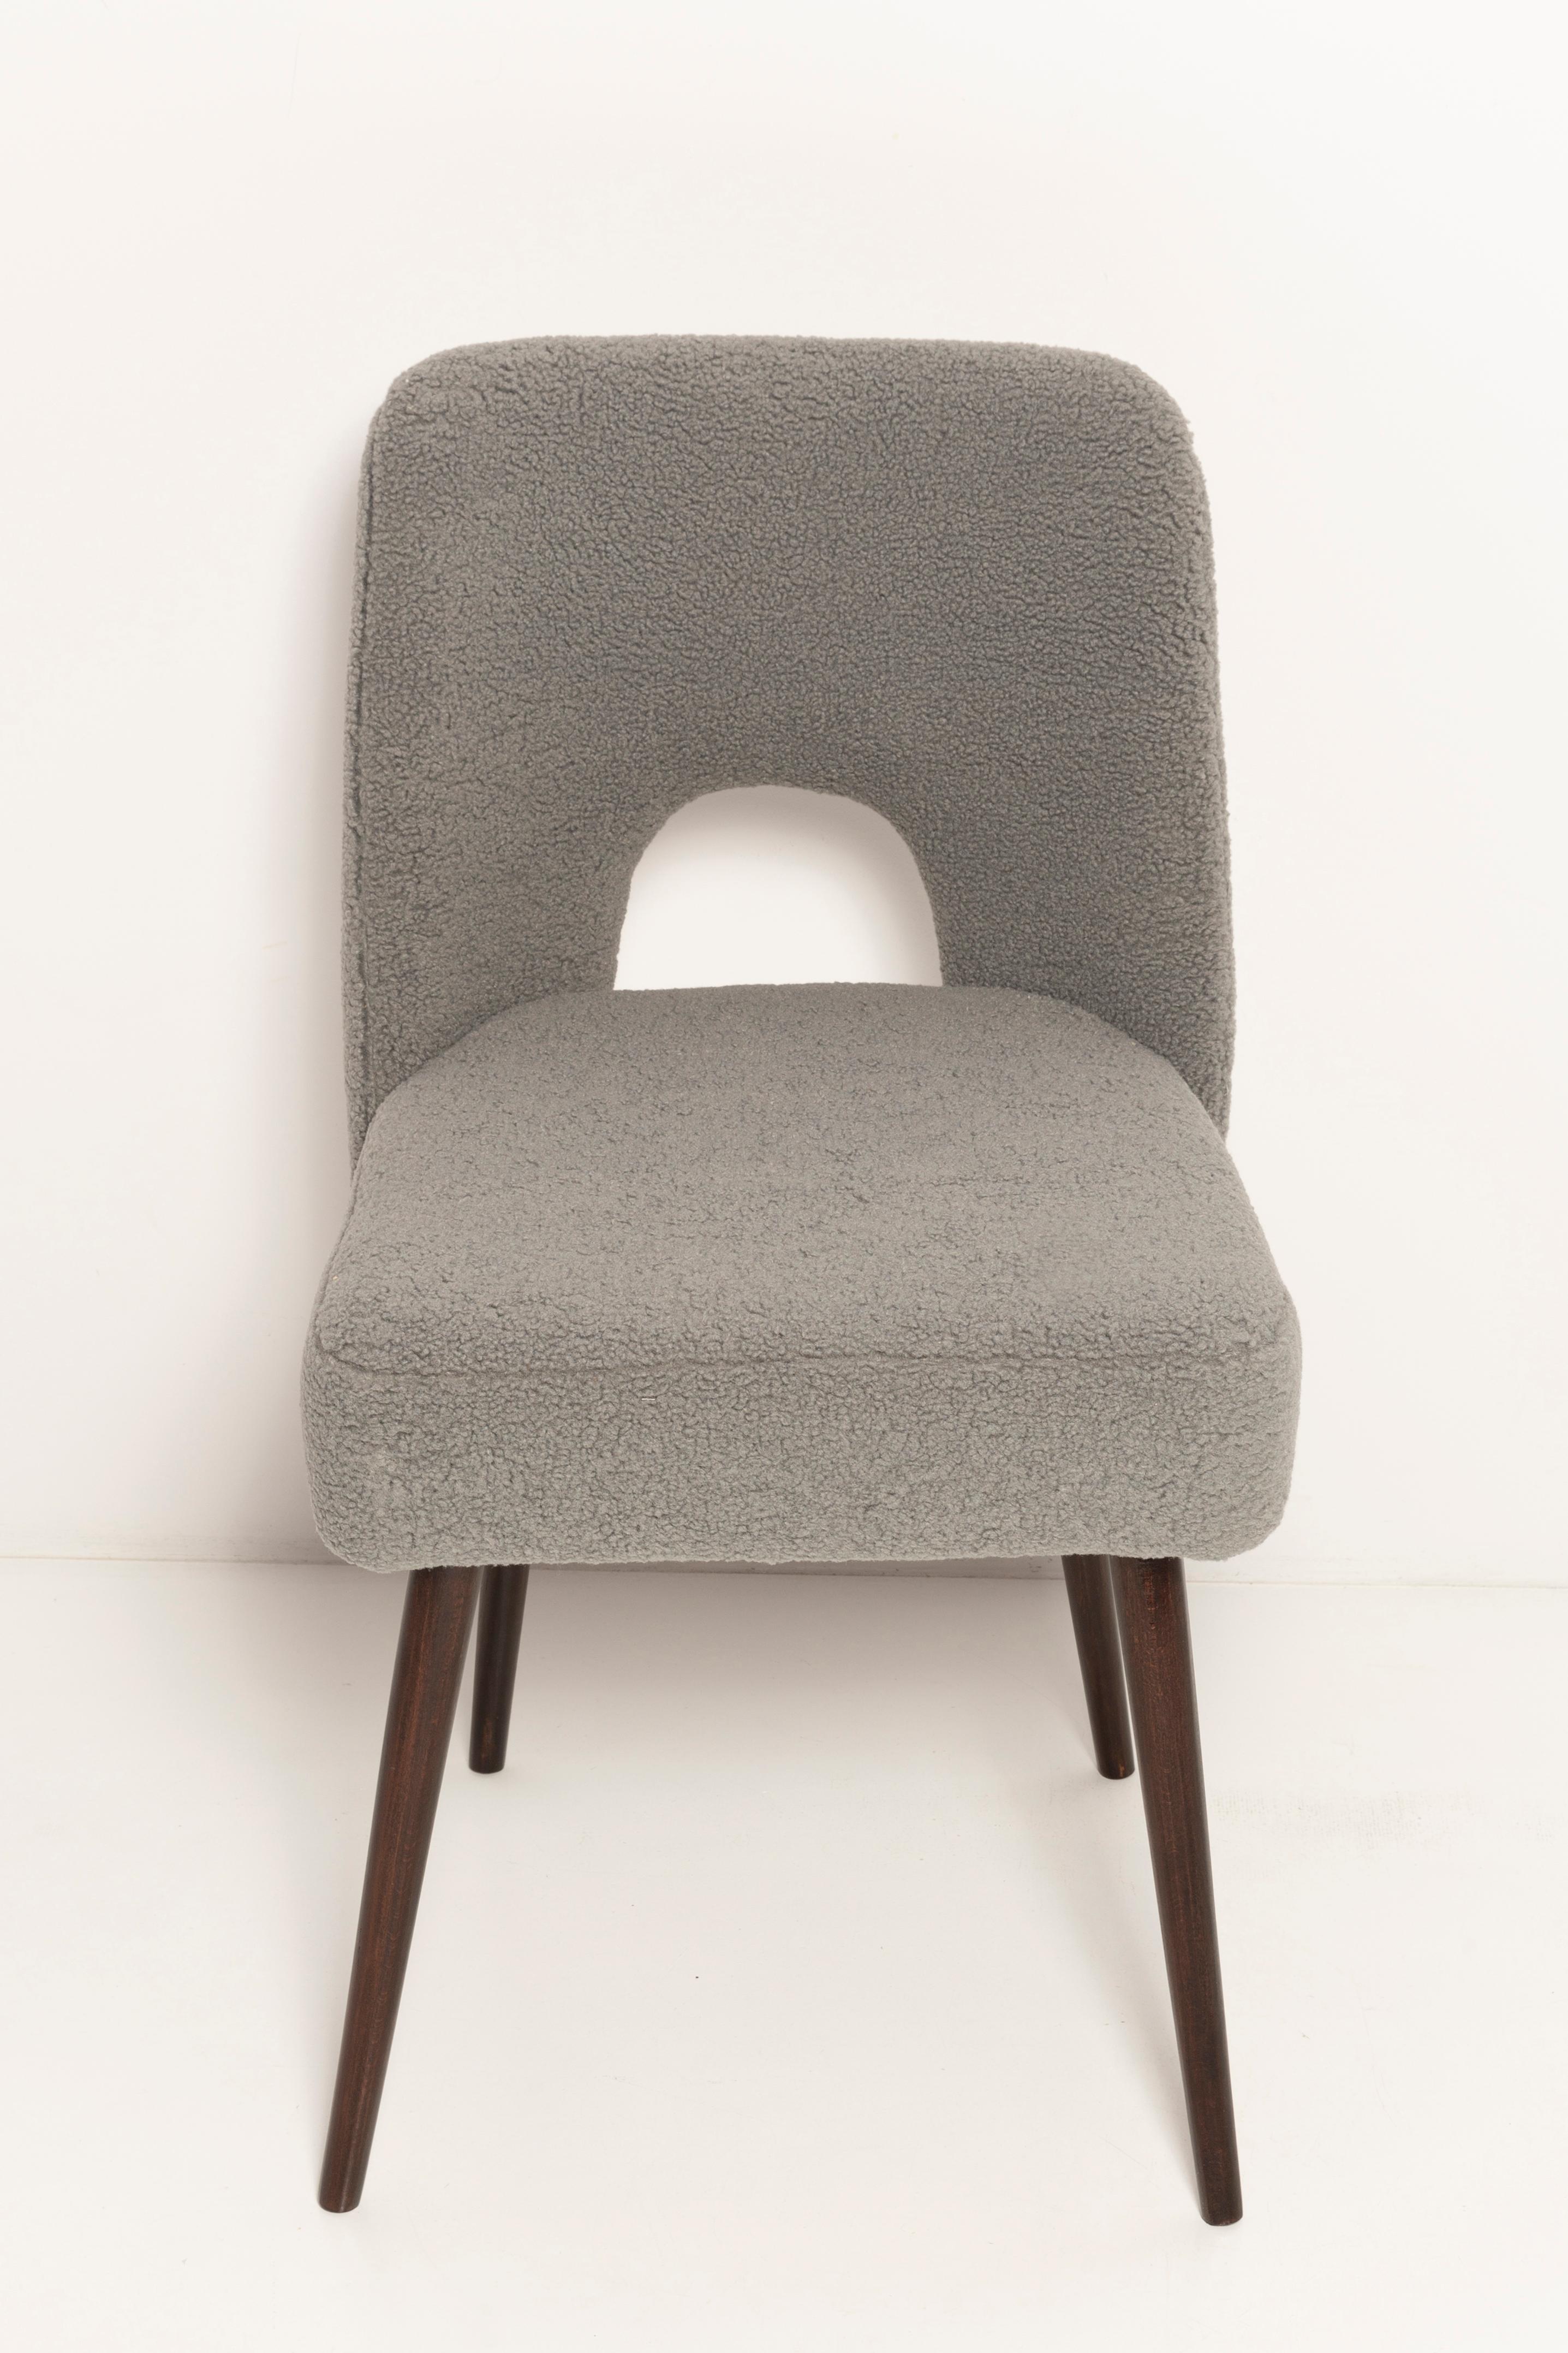 20th Century Gray Boucle 'Shell' Chair, Europe, 1960s For Sale